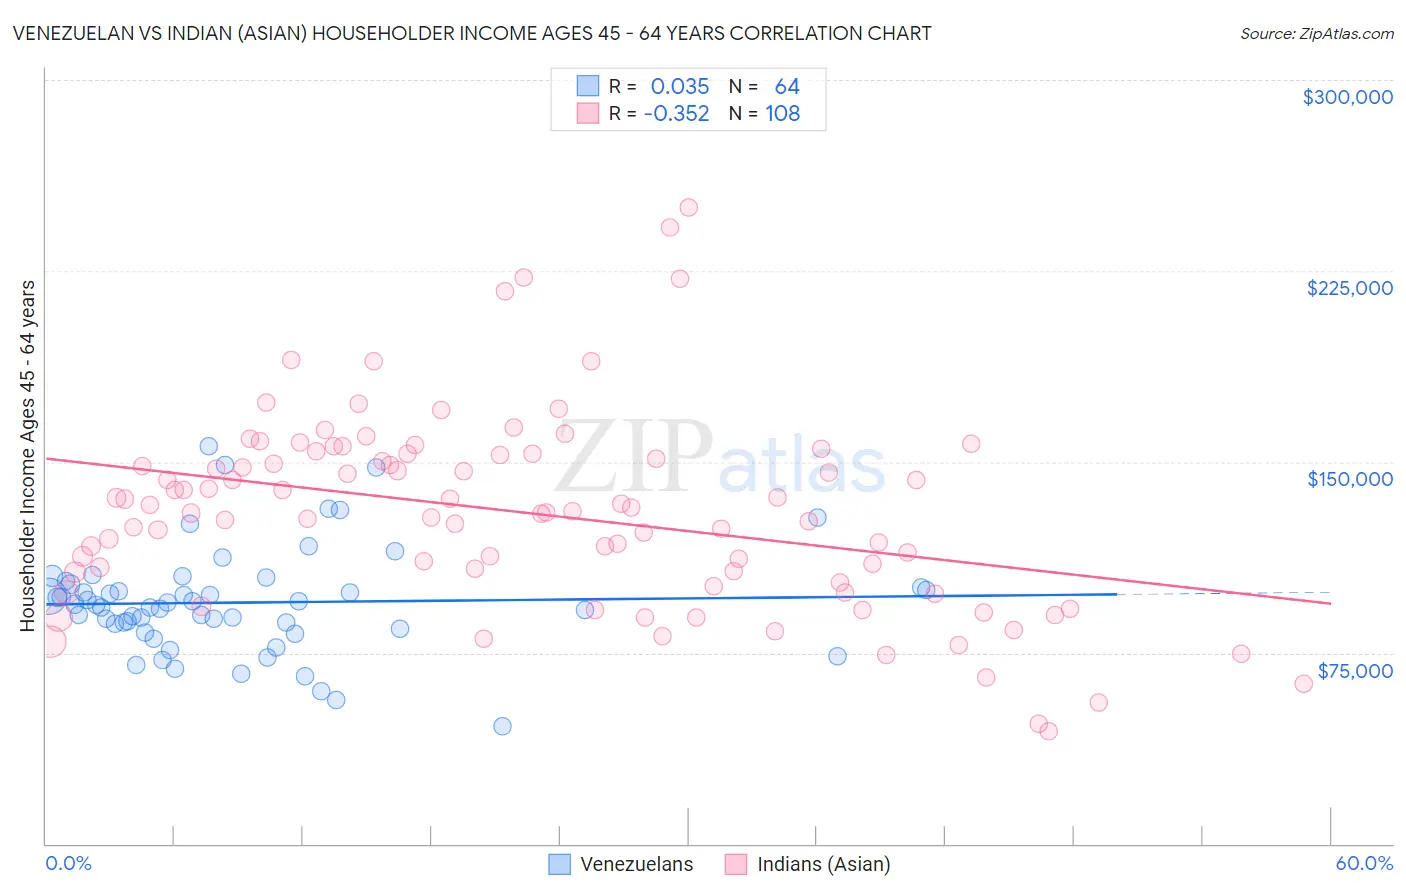 Venezuelan vs Indian (Asian) Householder Income Ages 45 - 64 years